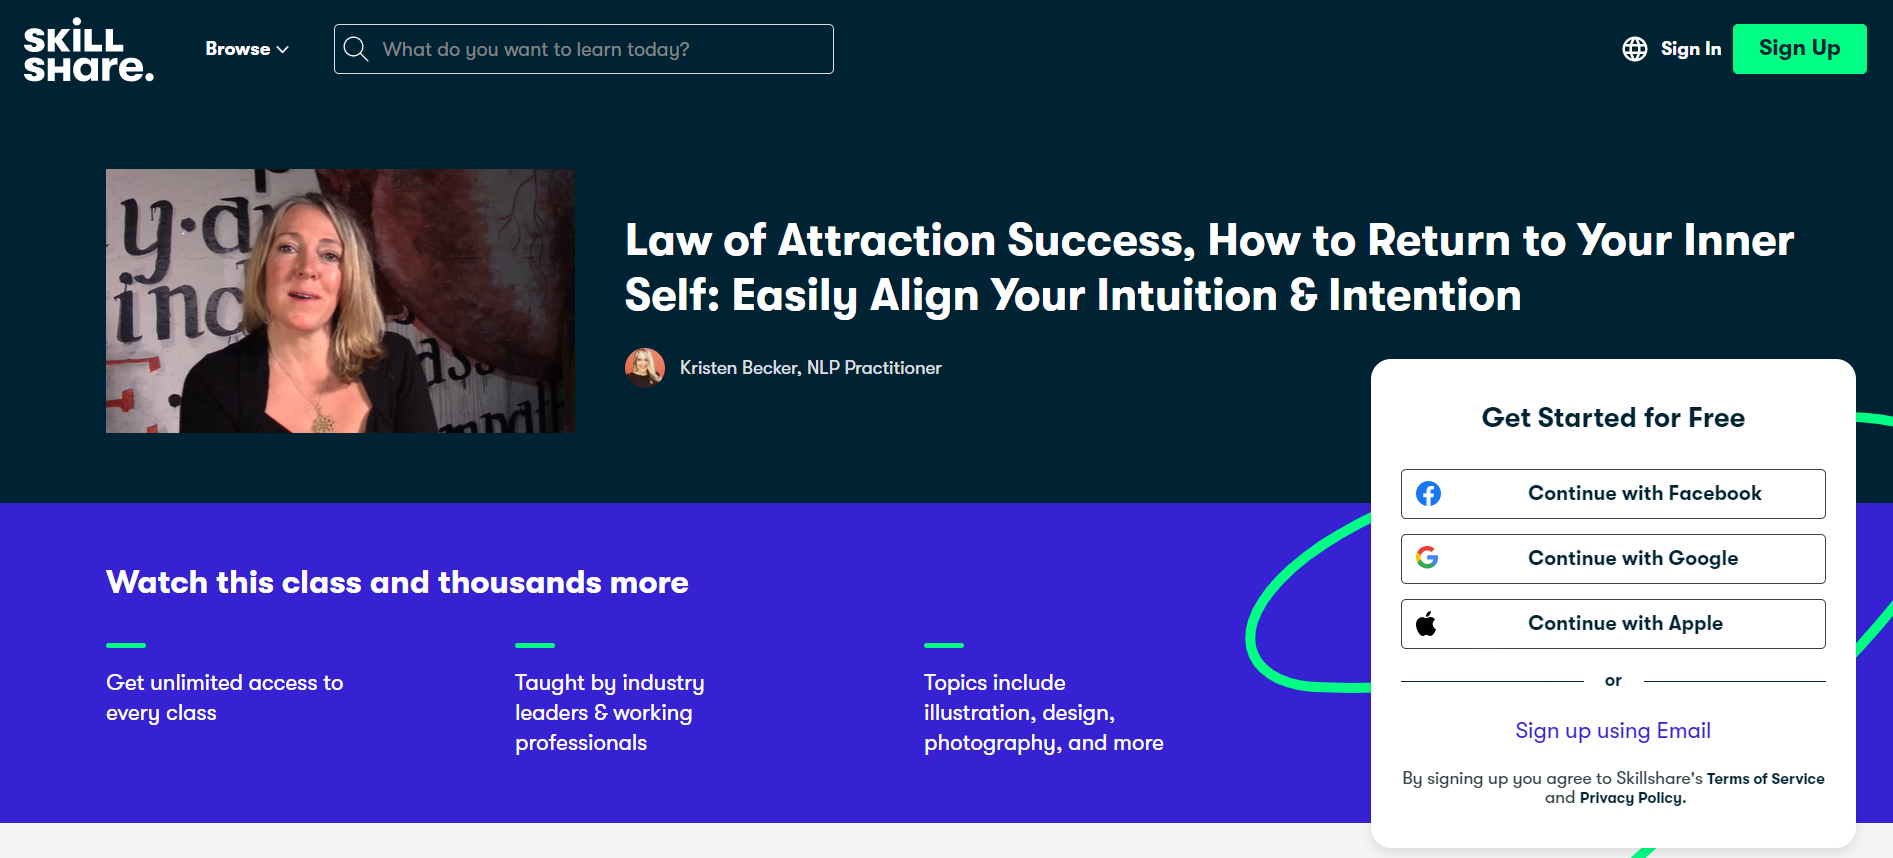 Law of Attraction Success, How to Return to Your Inner Self Easily Align Your Intuition & Intention